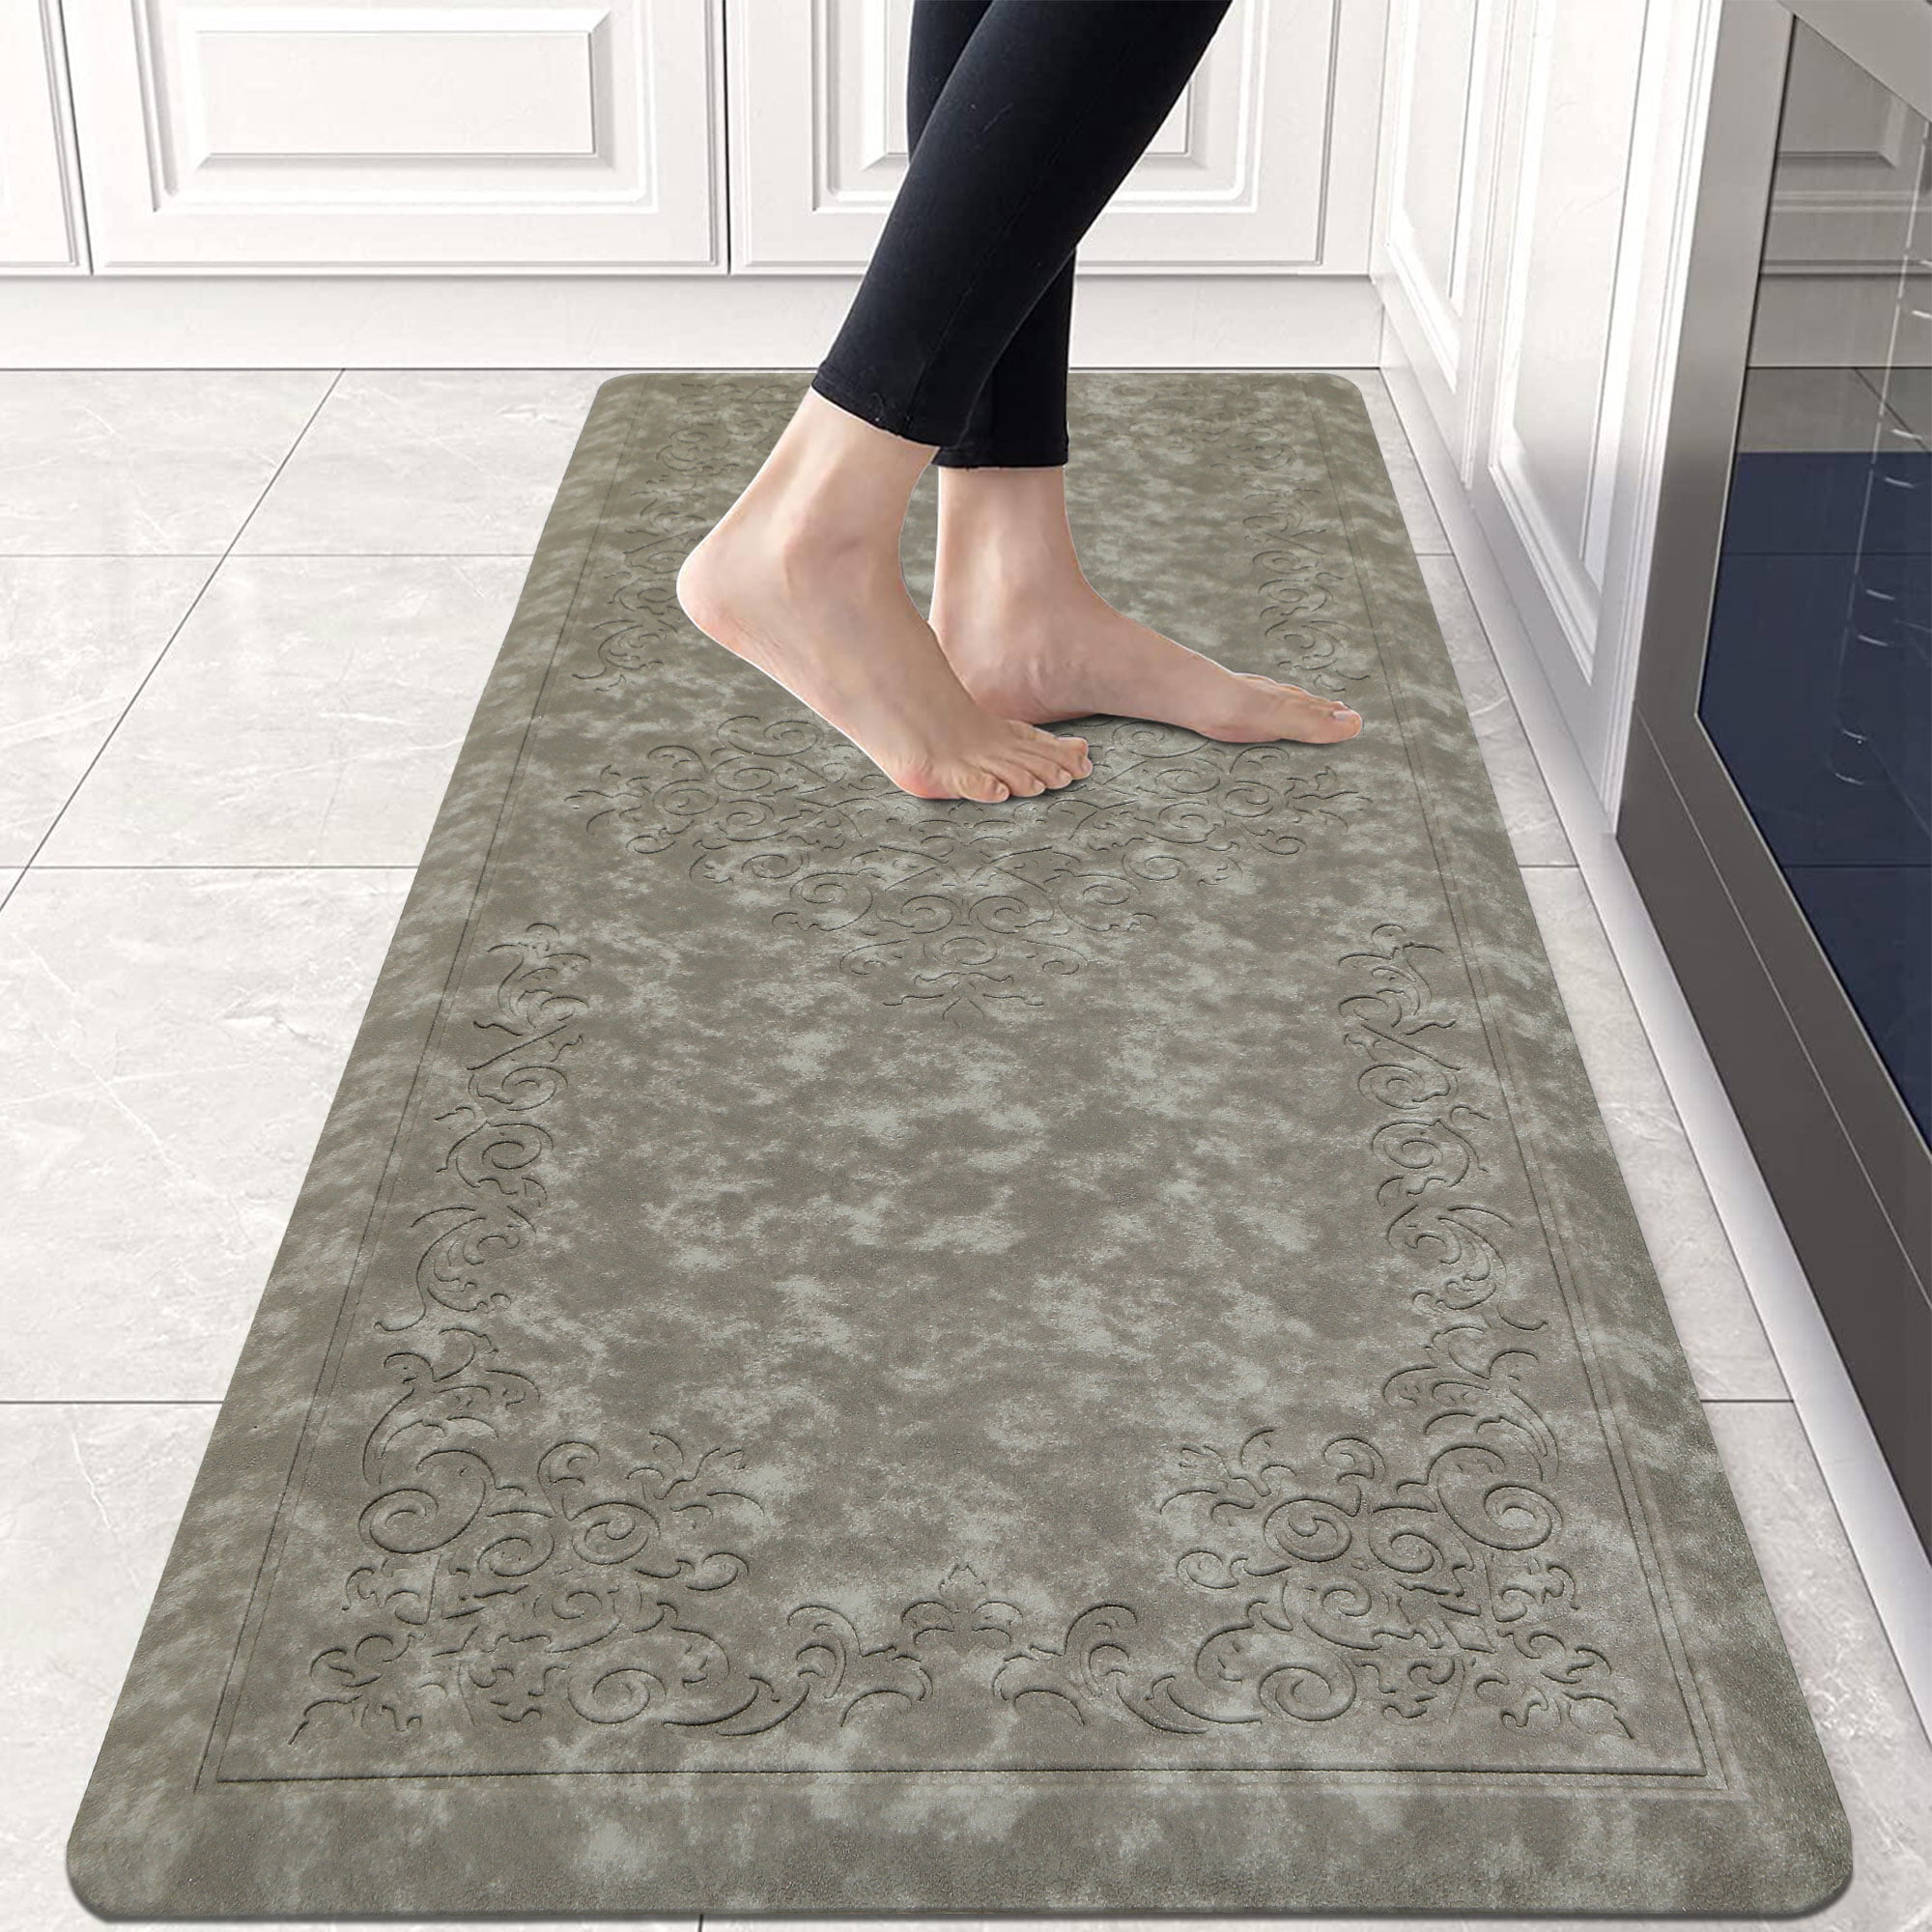 Oakeep Kitchen Mat Anti Fatigue Cushioned Mats for Floor Runner Rug Padded  Kitchen Mats for Standing, 17x95, Grey